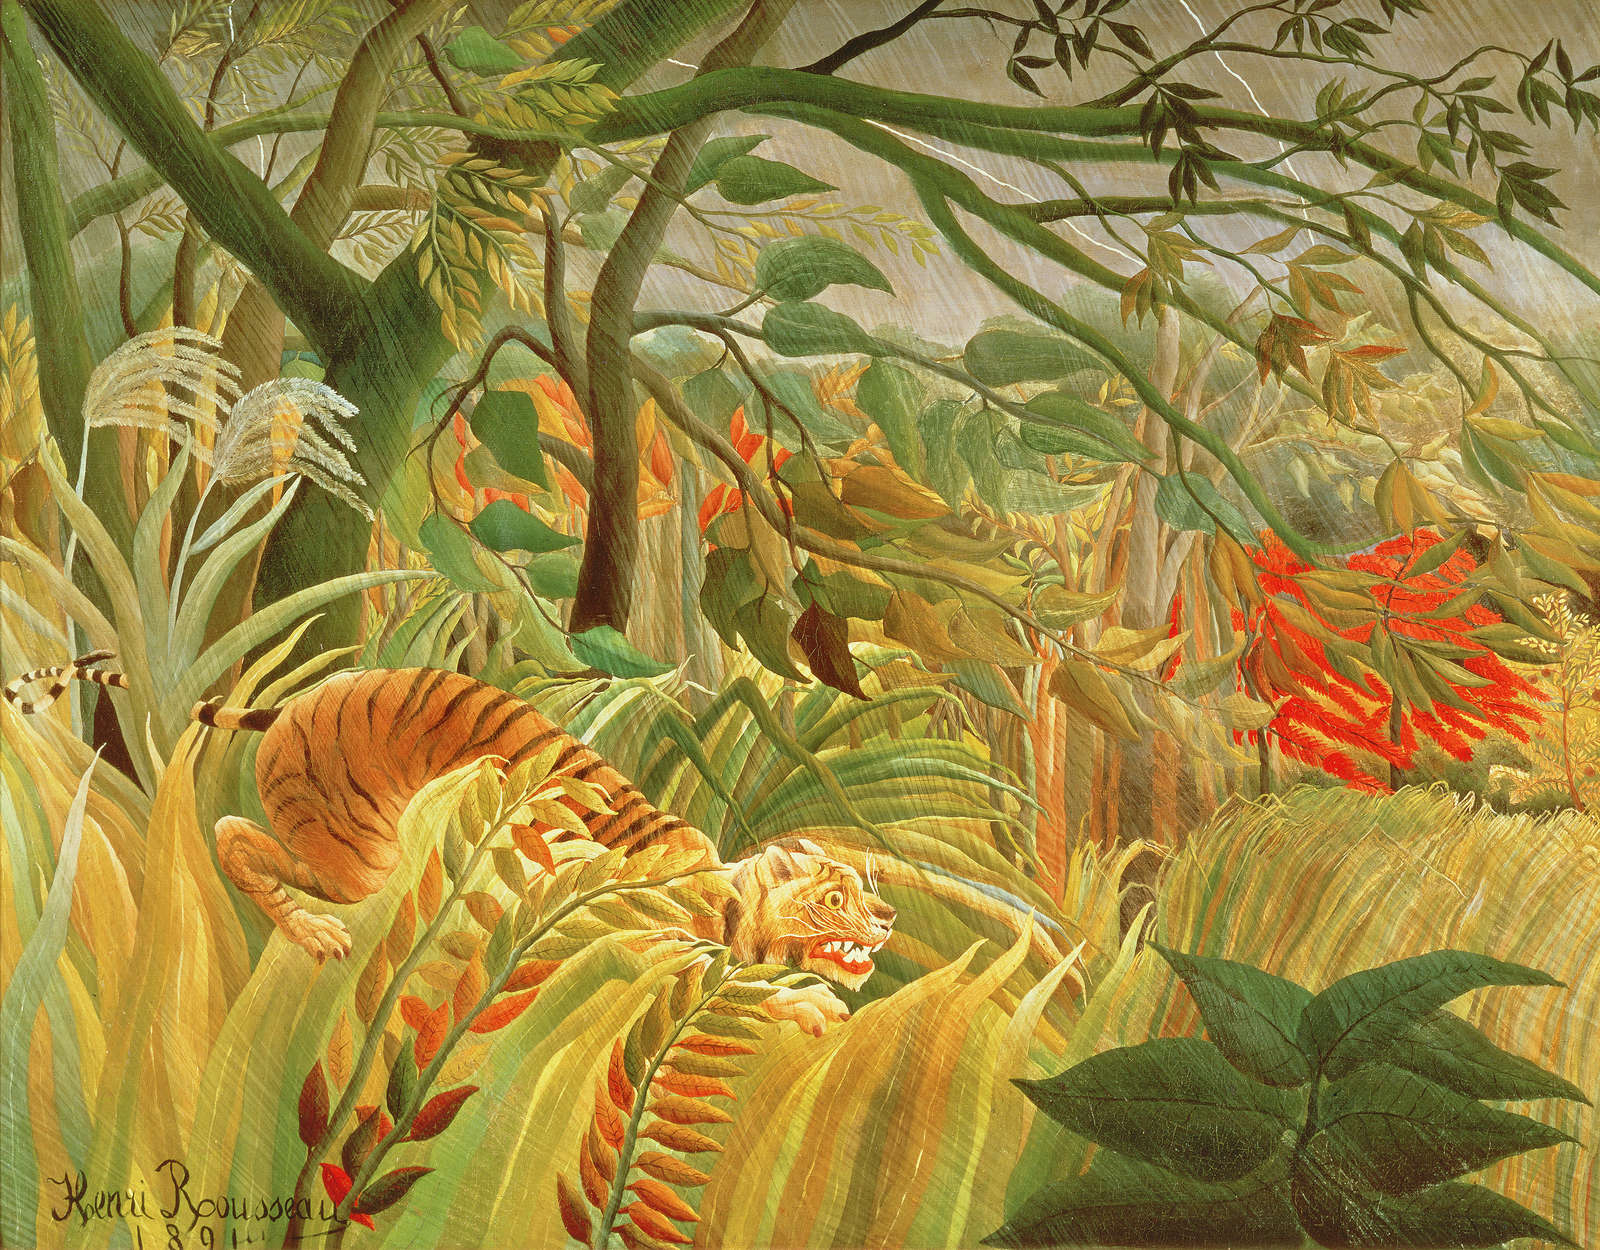             Photo wallpaper "Tiger in a tropical storm" by Henri Rousseau
        